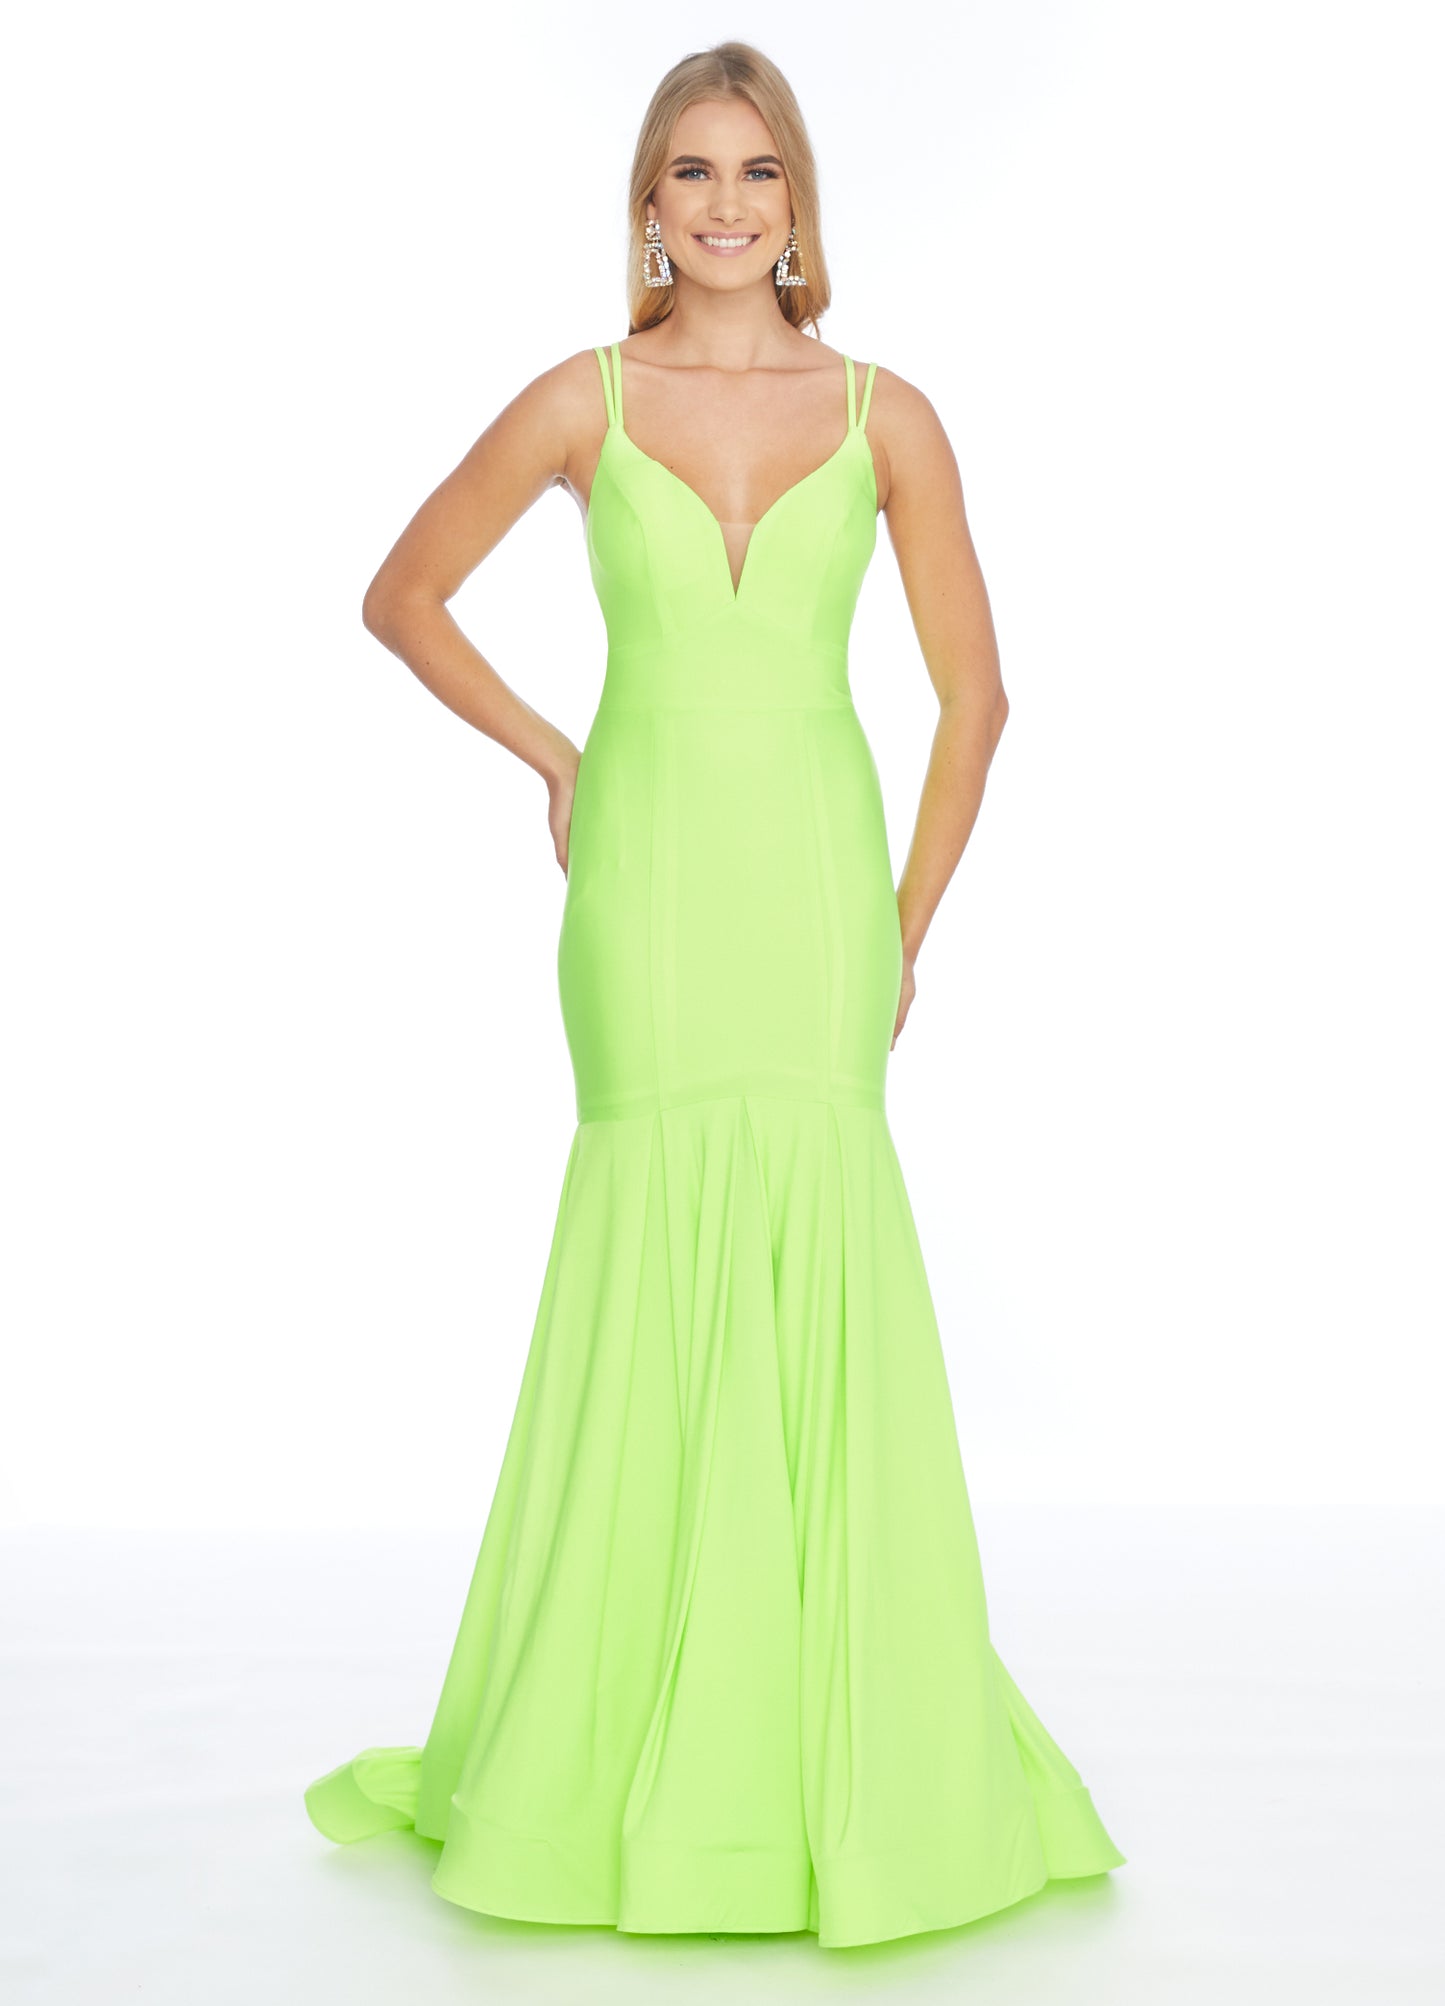 Ashley Lauren 1870 This stunning fit & flare evening gown is sure to turn heads! The bustier is has a v-neckline complete with double spaghetti straps and illusion panel sides. The skirt embellished with box-pleats and sweeping train. Racer Back Jersey  Available Sizes: 2  Available Colors: Neon Green